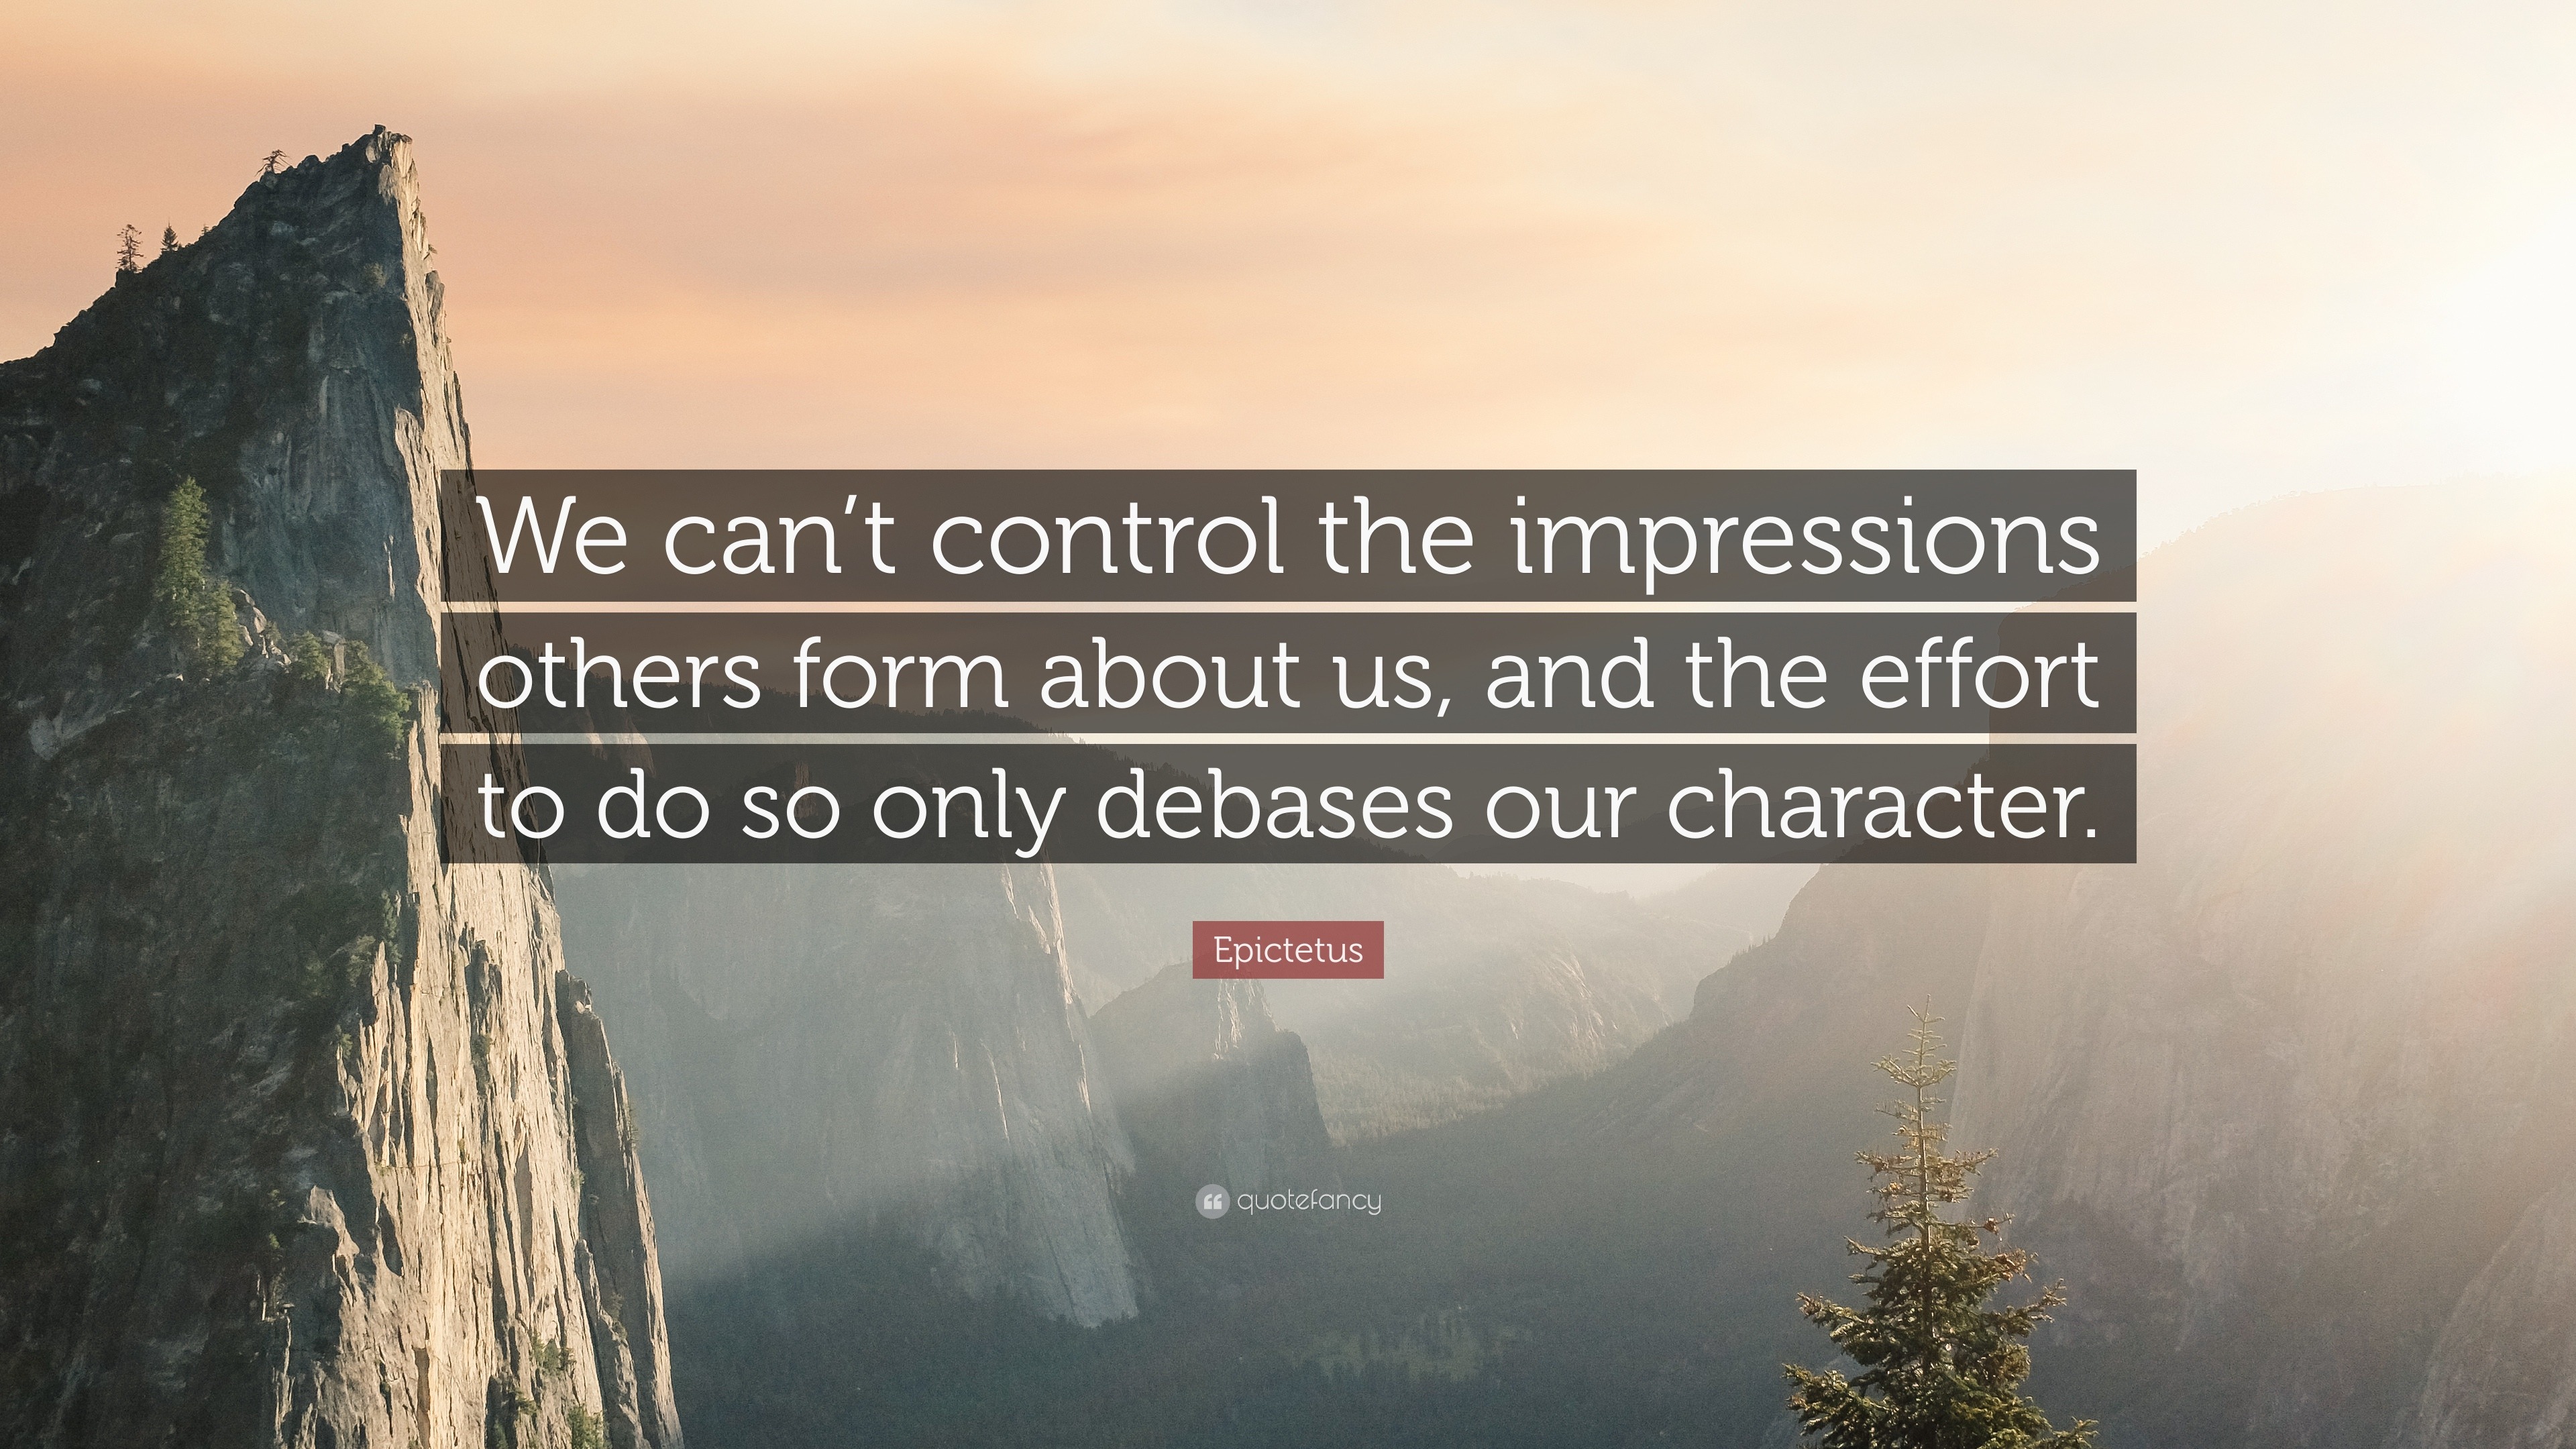 216490-Epictetus-Quote-We-can-t-control-the-impressions-others-form-about.jpg